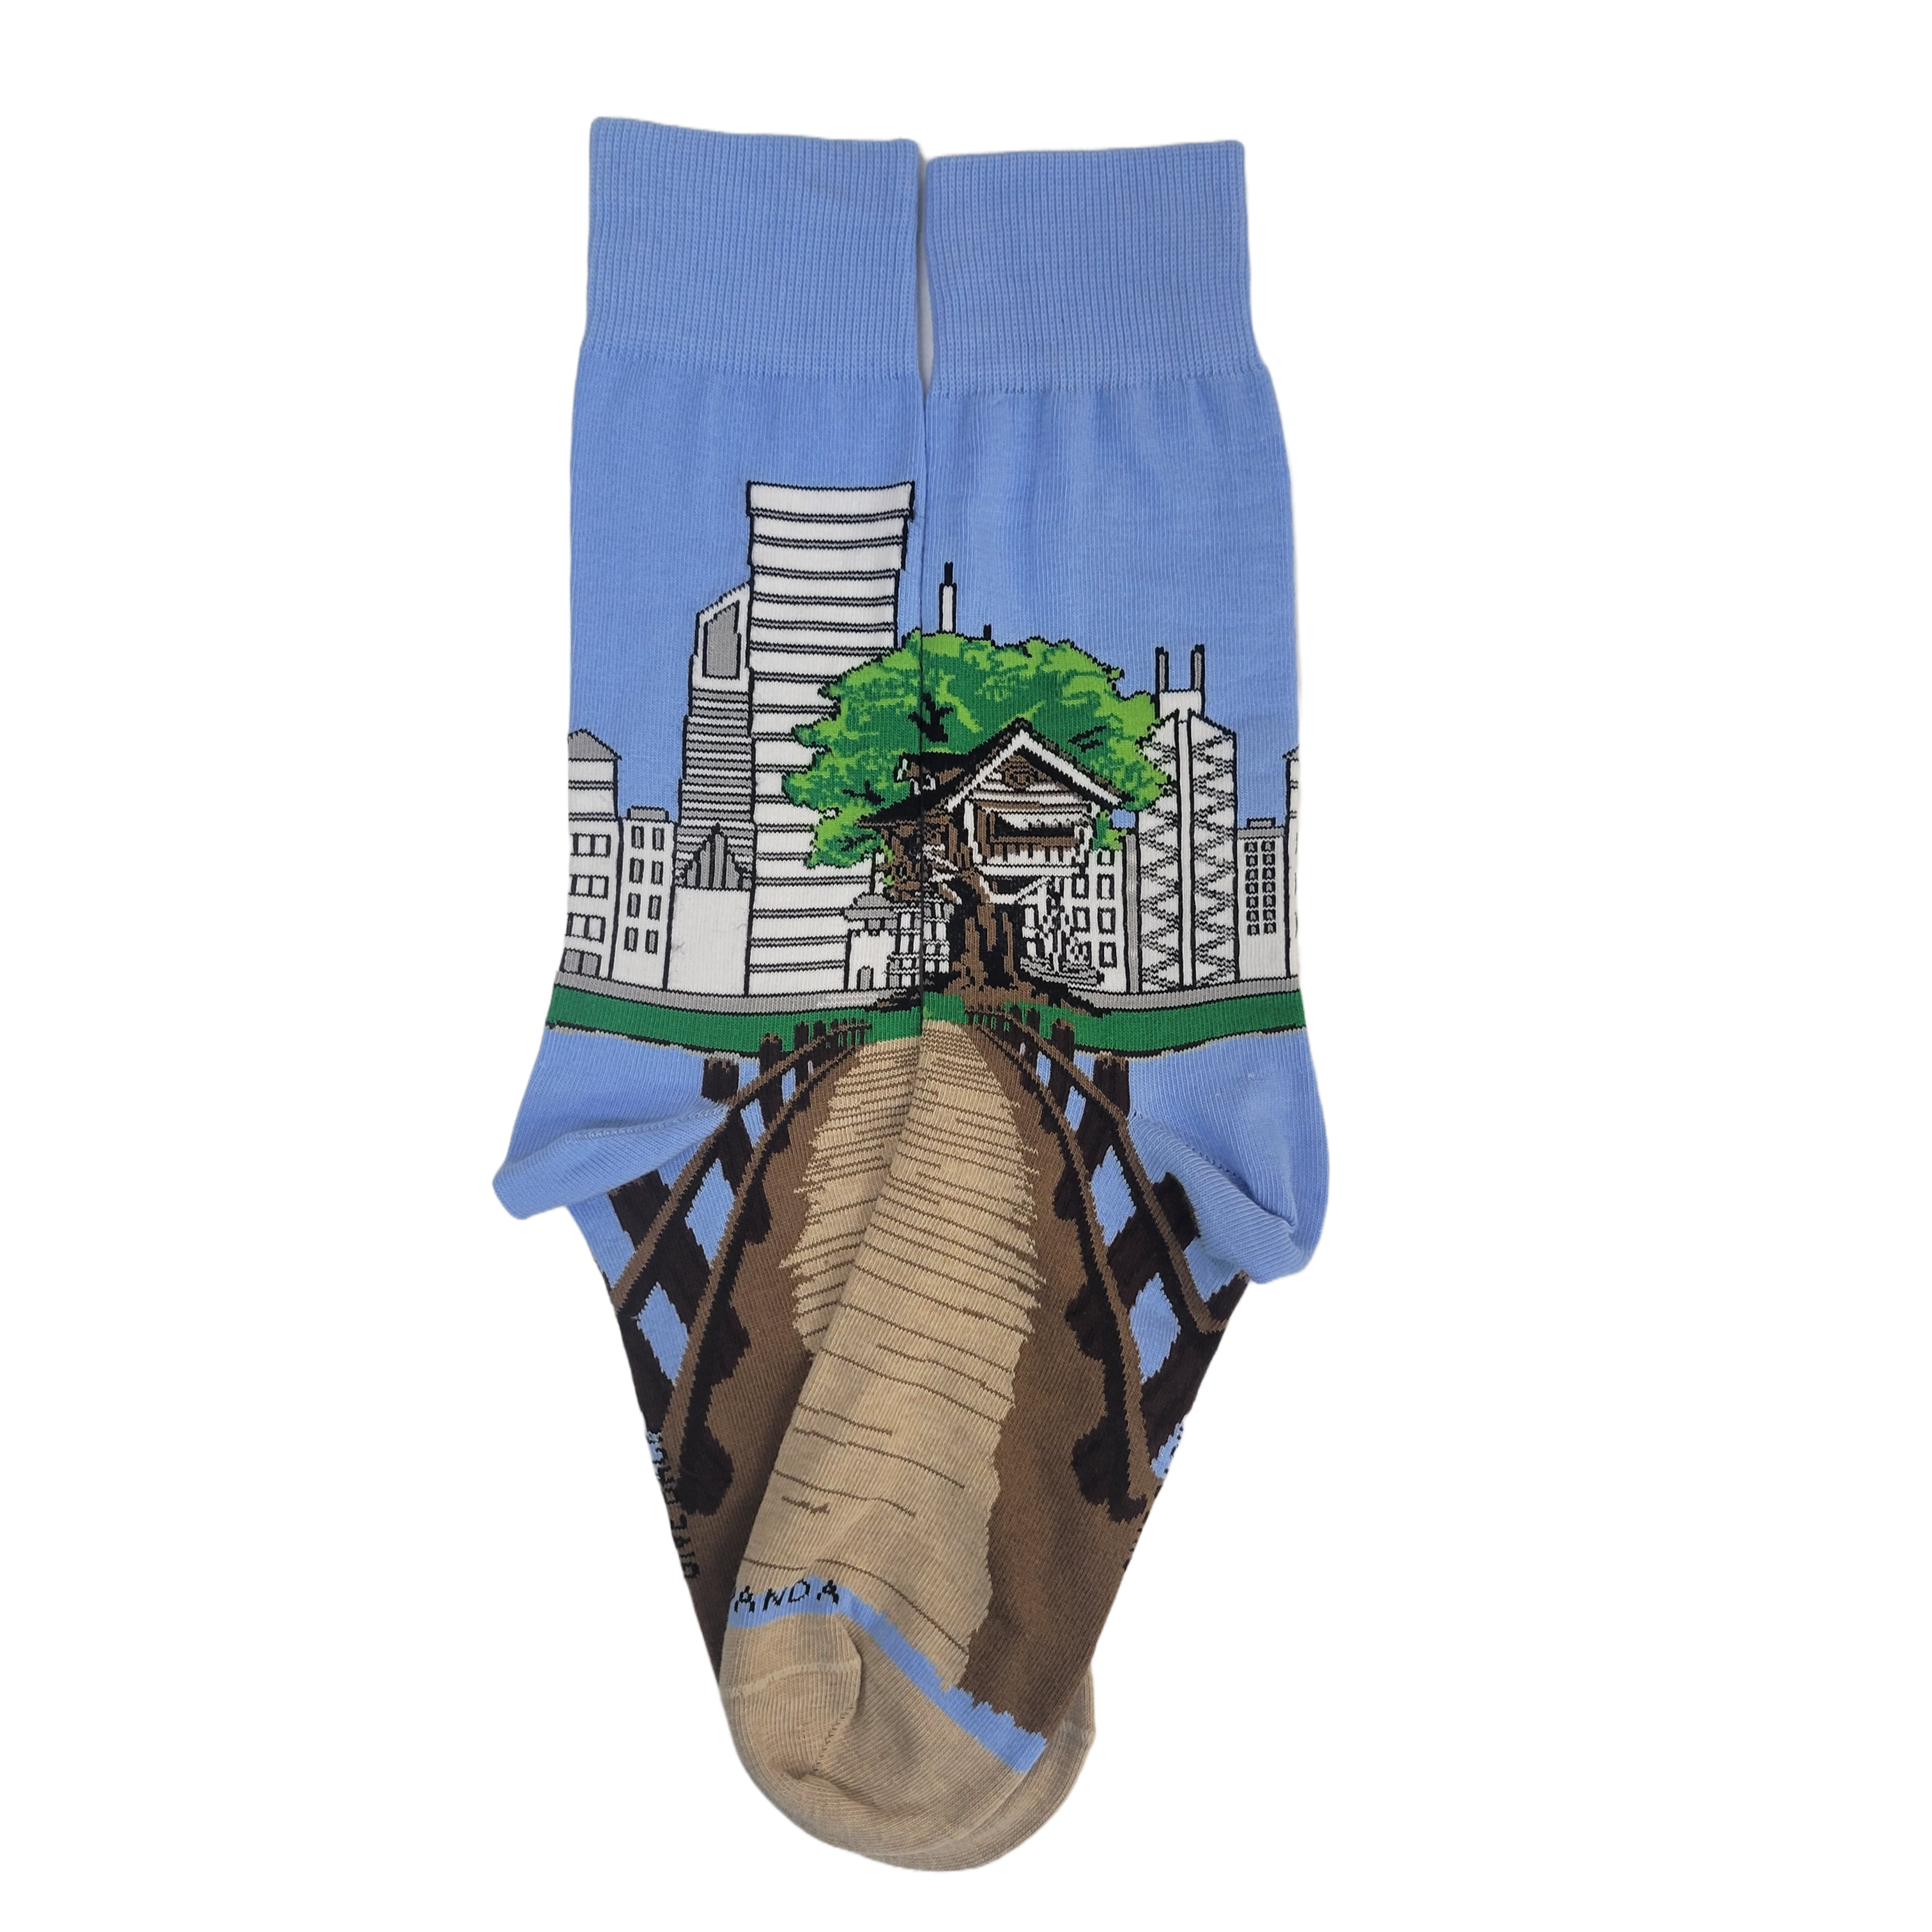 Treehouse in the City Socks from the Sock Panda (Adult Large)